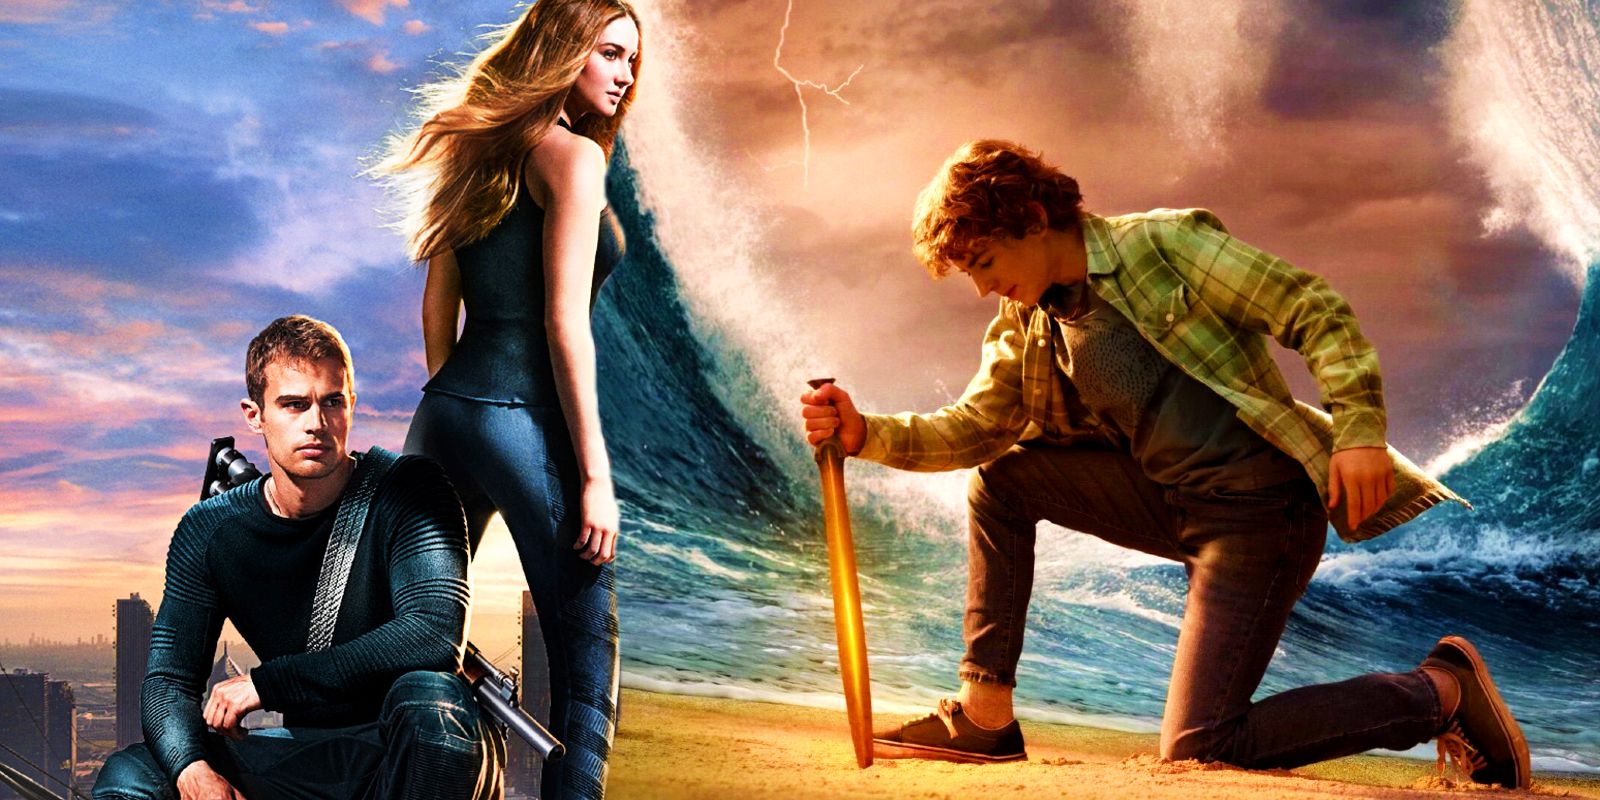 This image shows Percy Jackson, Tris, and Four.